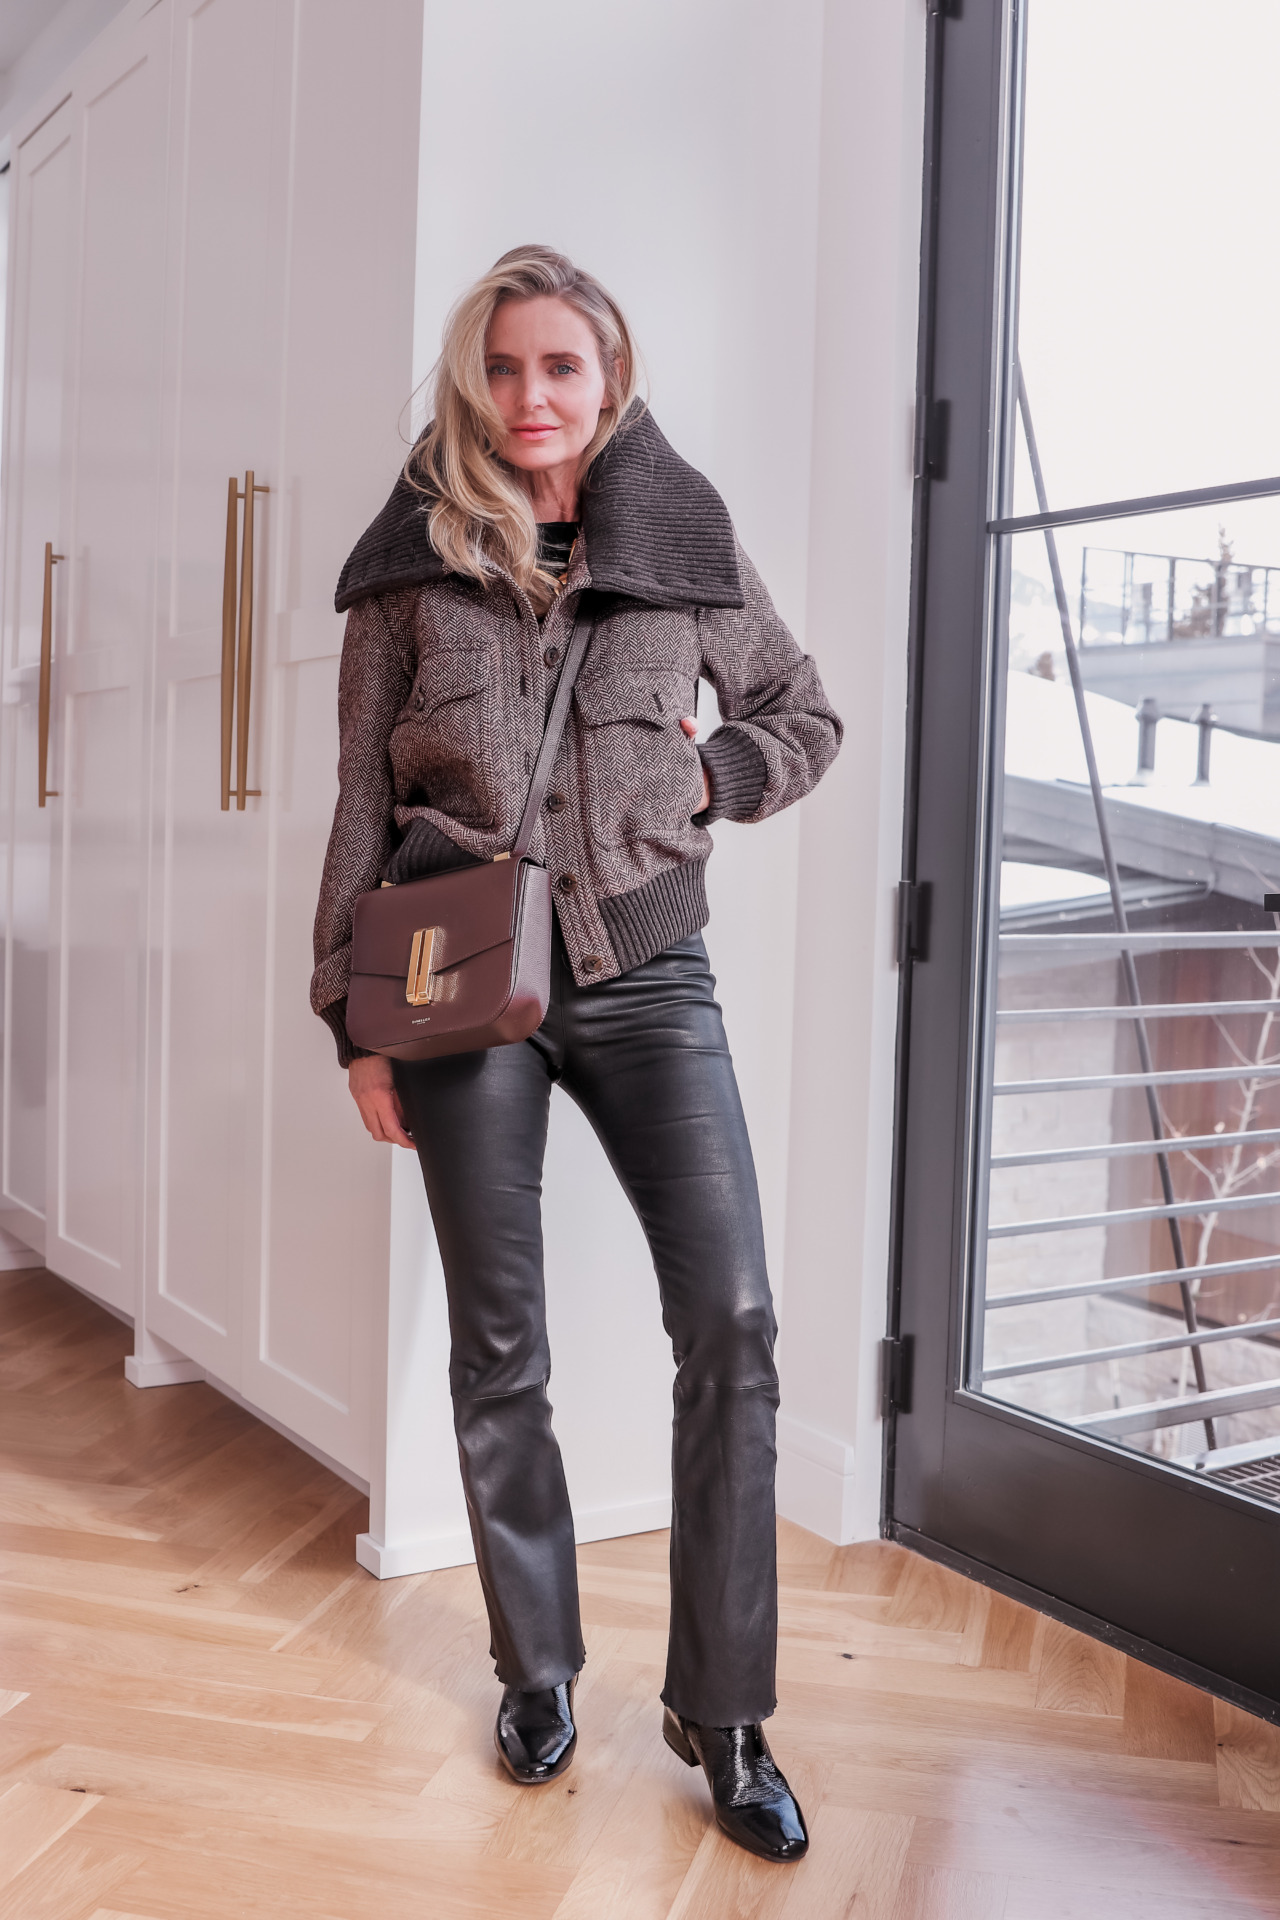 How To Wear Ankle Boots In The Winter When You're Over 40